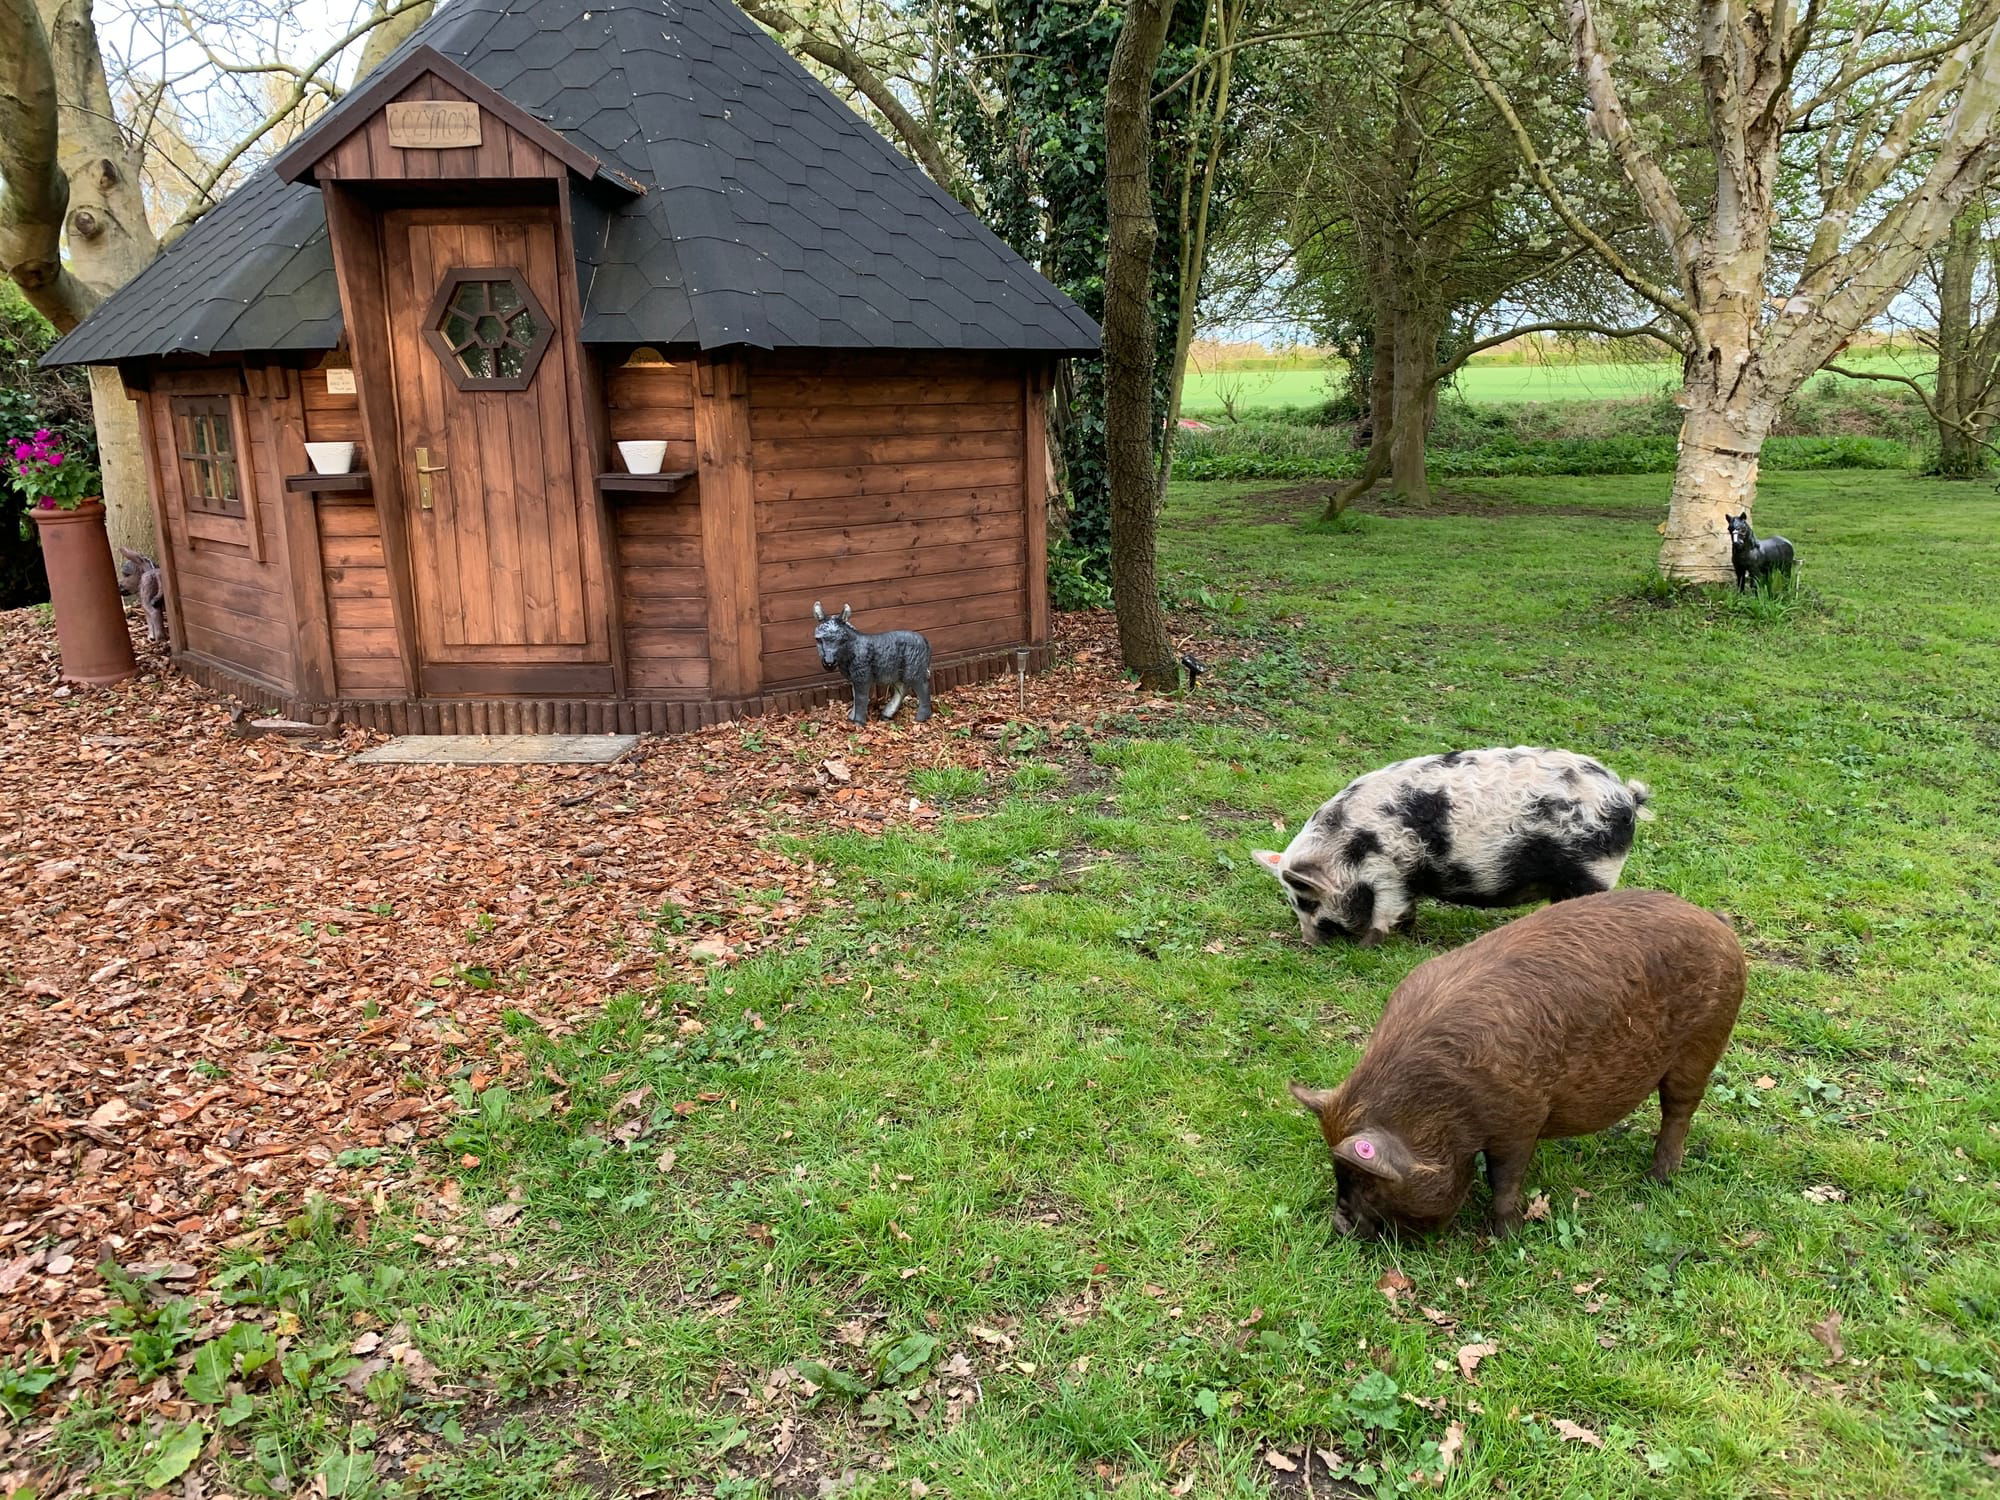 Our beautiful Cozy Nook and pigs!